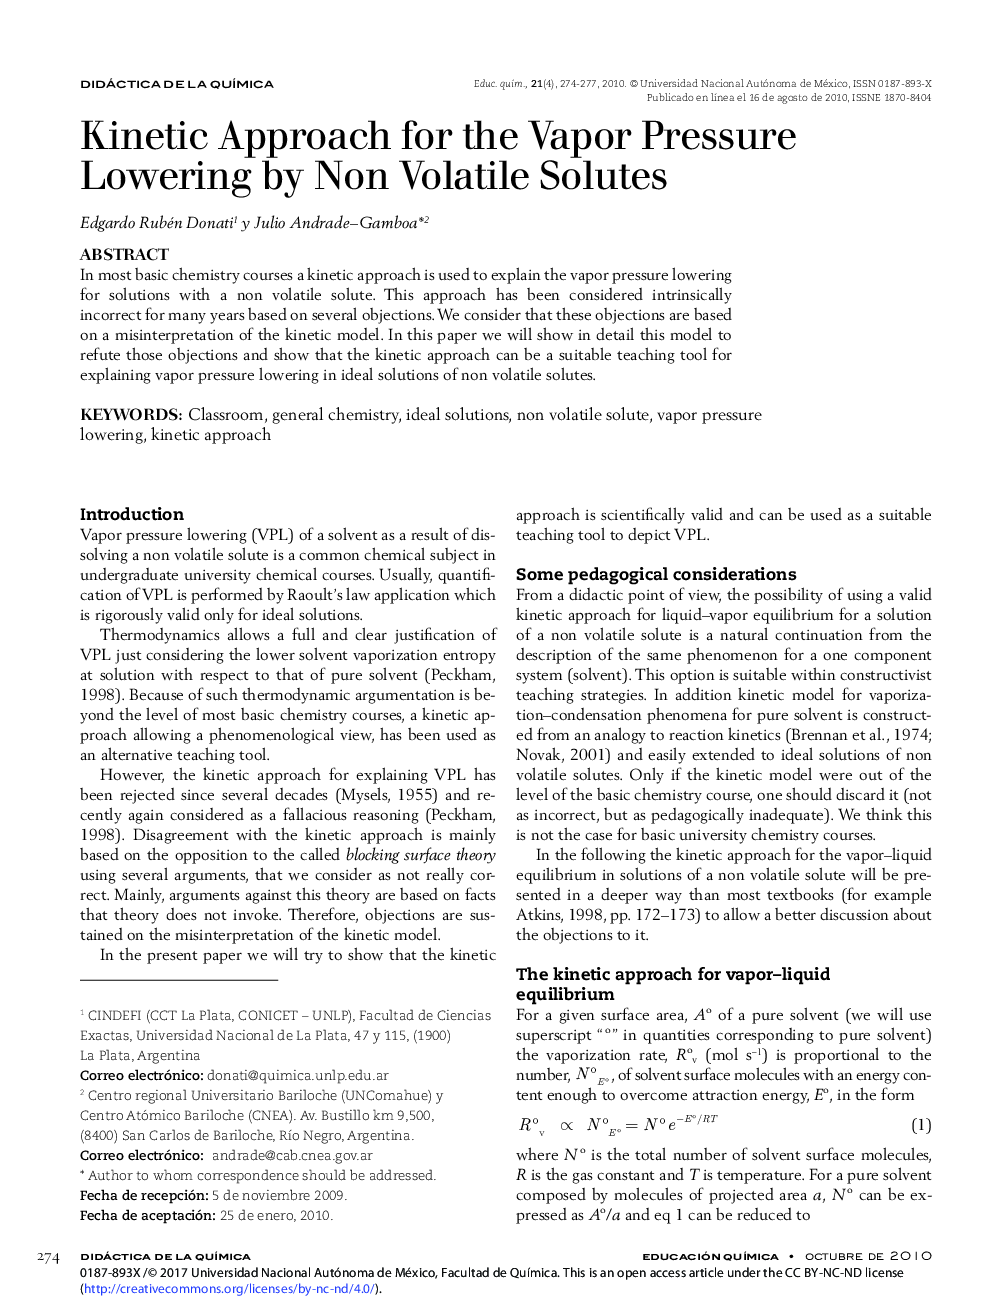 Kinetic Approach for the Vapor Pressure Lowering by Non Volatile Solutes